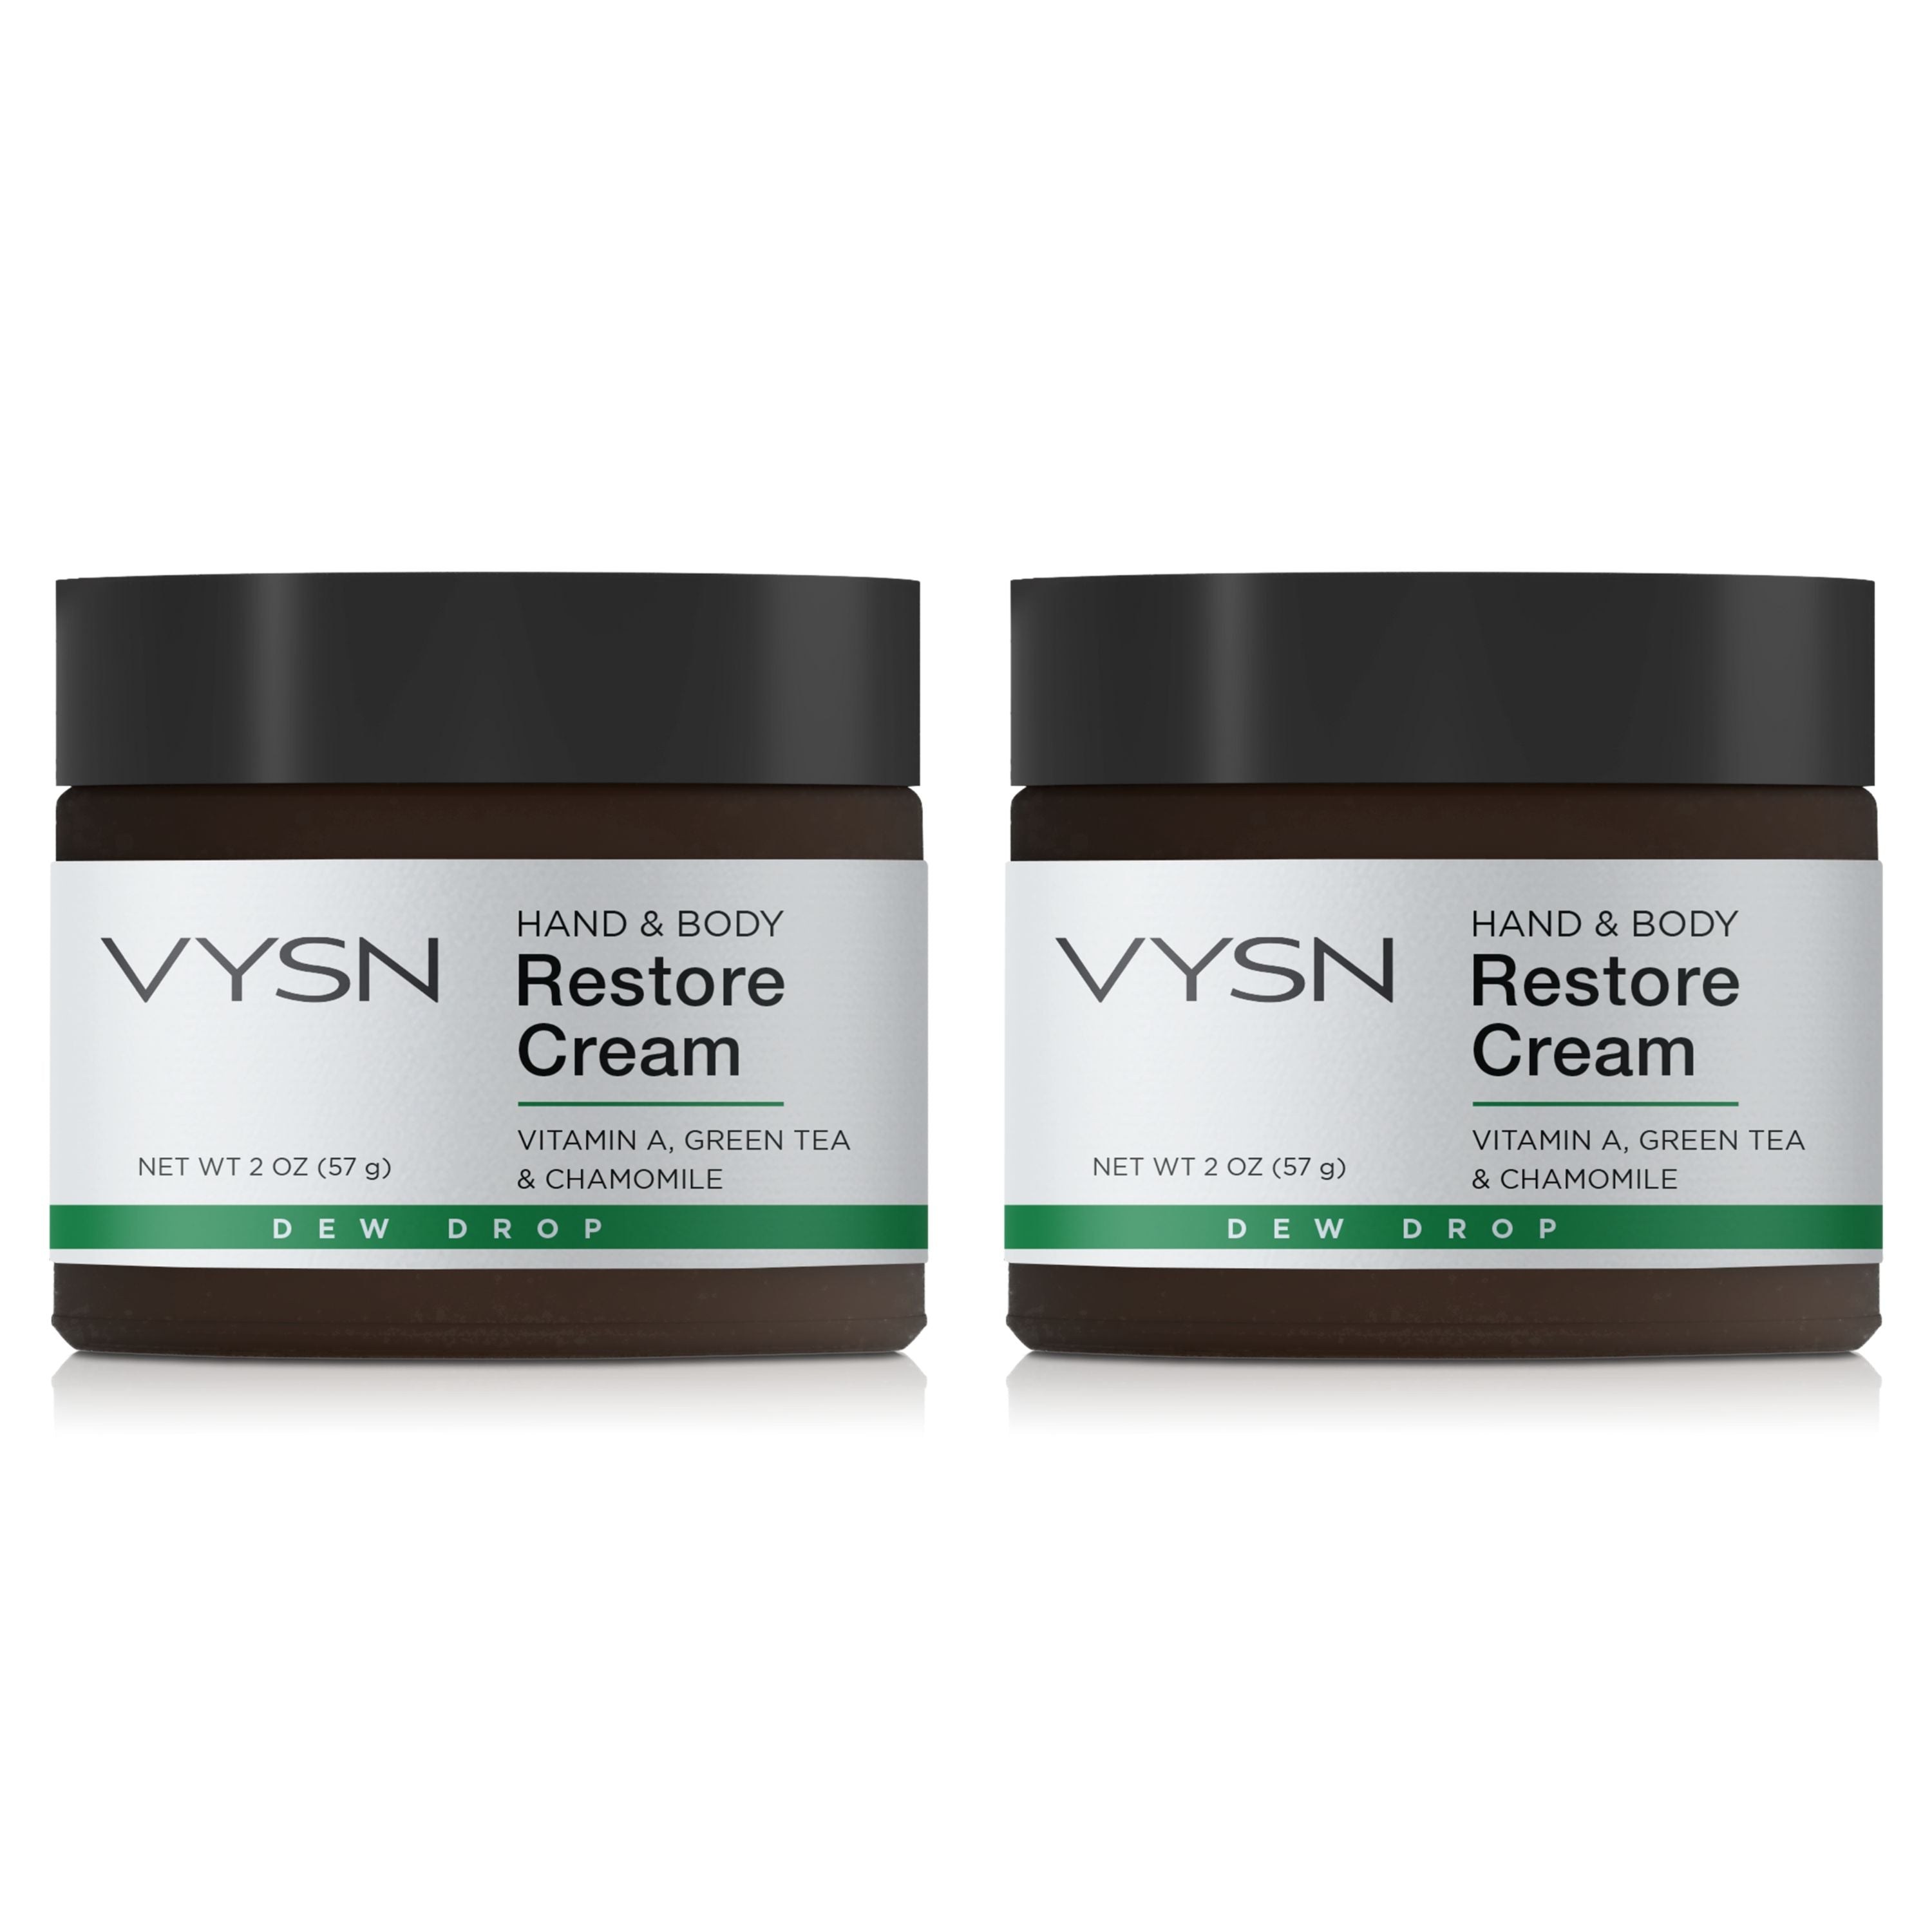 title:VYSN Hand & Body Restore Cream - Vitamin A, Green Tea & Chamomile - 2-Pack;color:not applicable